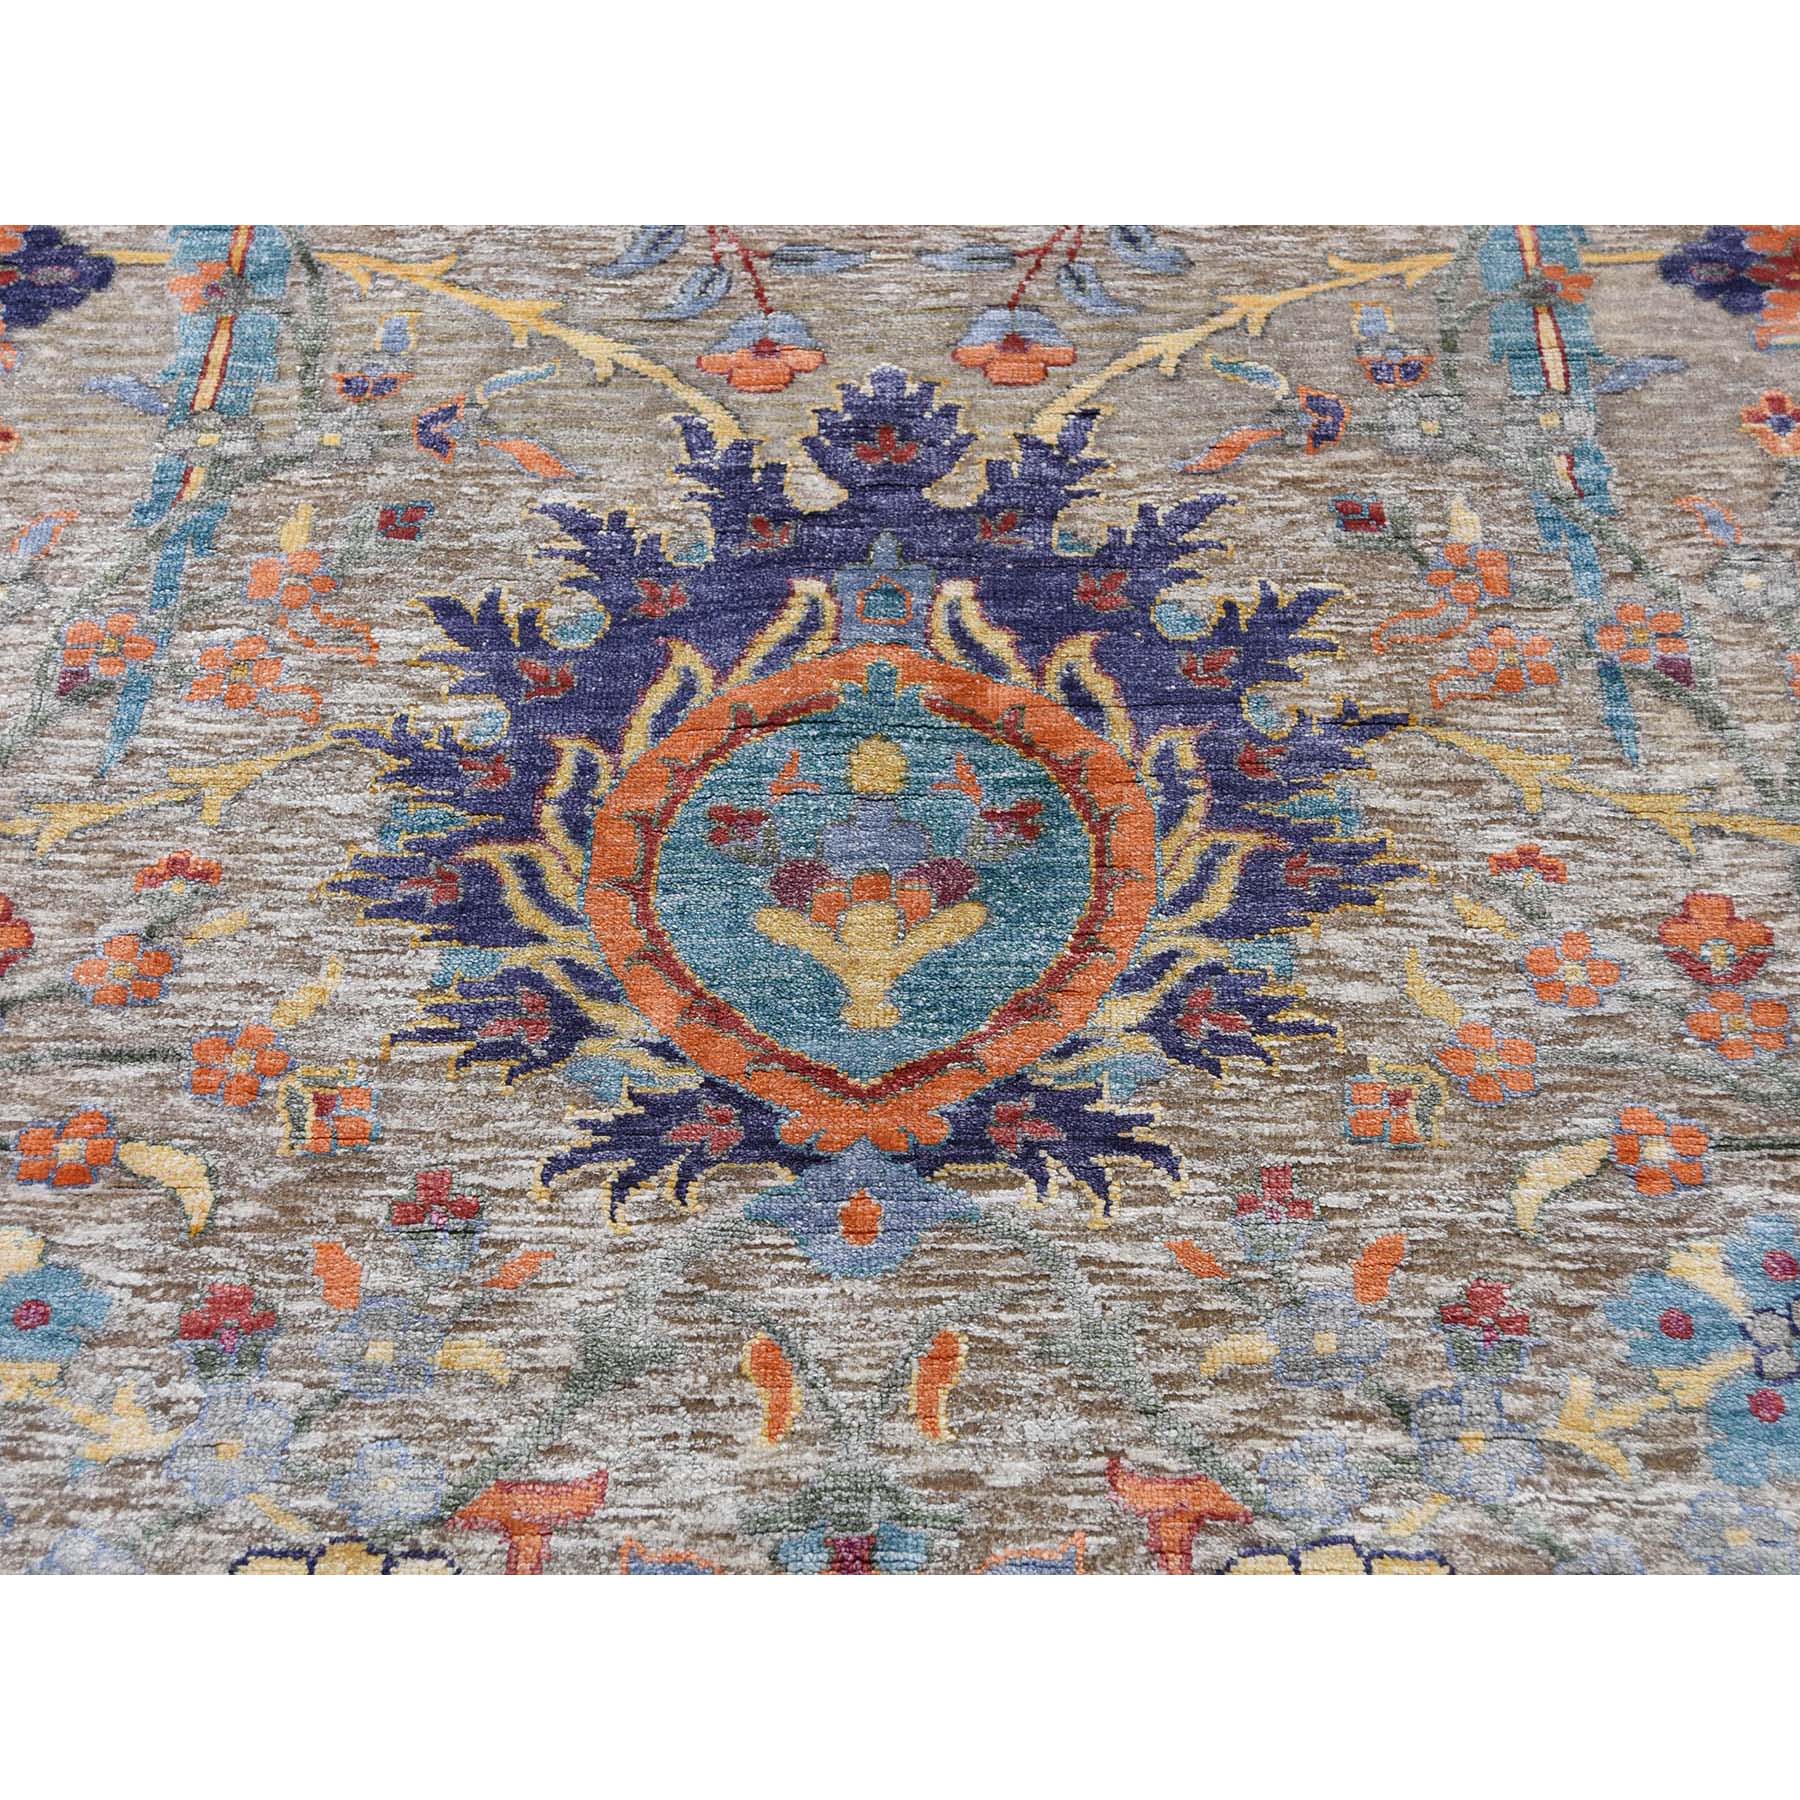 10-x14-2  Sickle Leaf Design Silk With Textured Wool Hand-Knotted Oriental Rug 